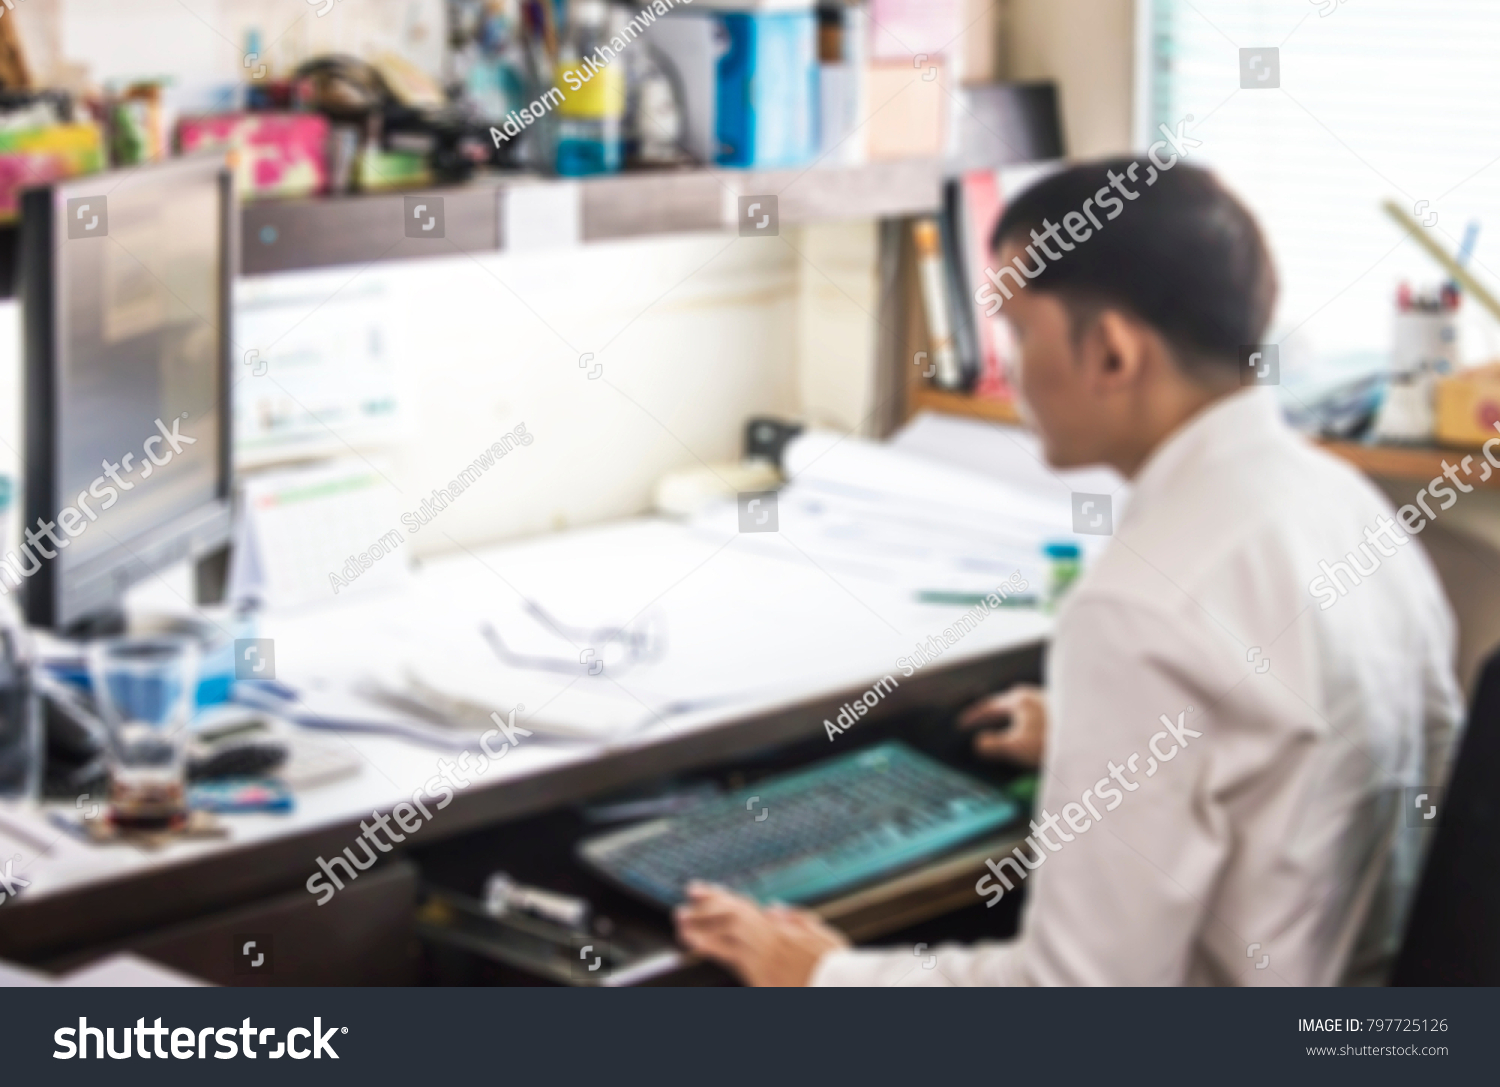 Blurry images of people working in companies #797725126